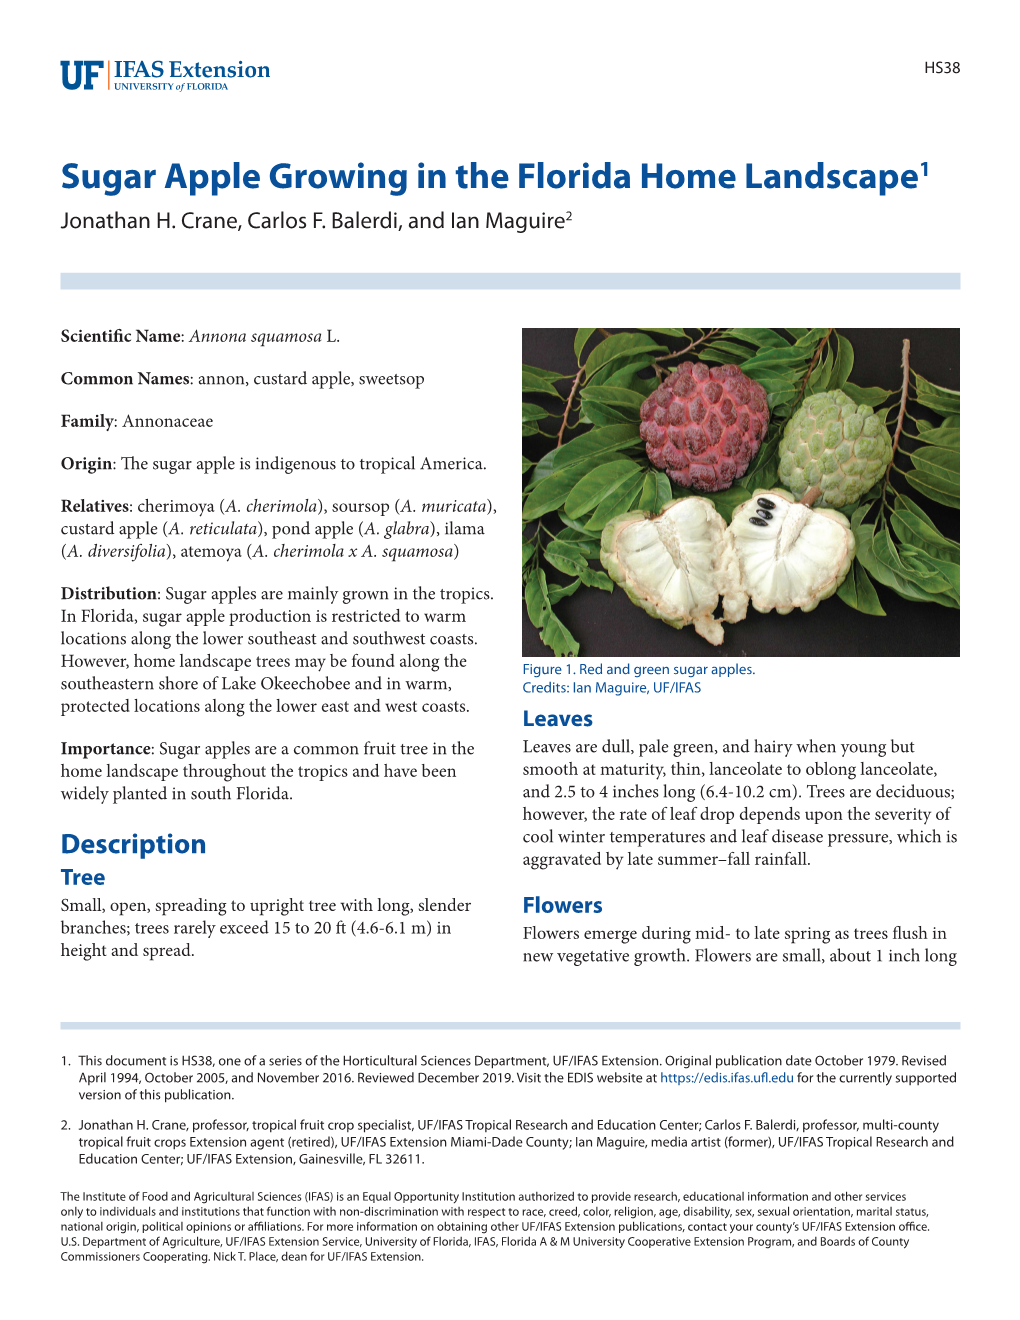 Sugar Apple Growing in the Florida Home Landscape1 Jonathan H